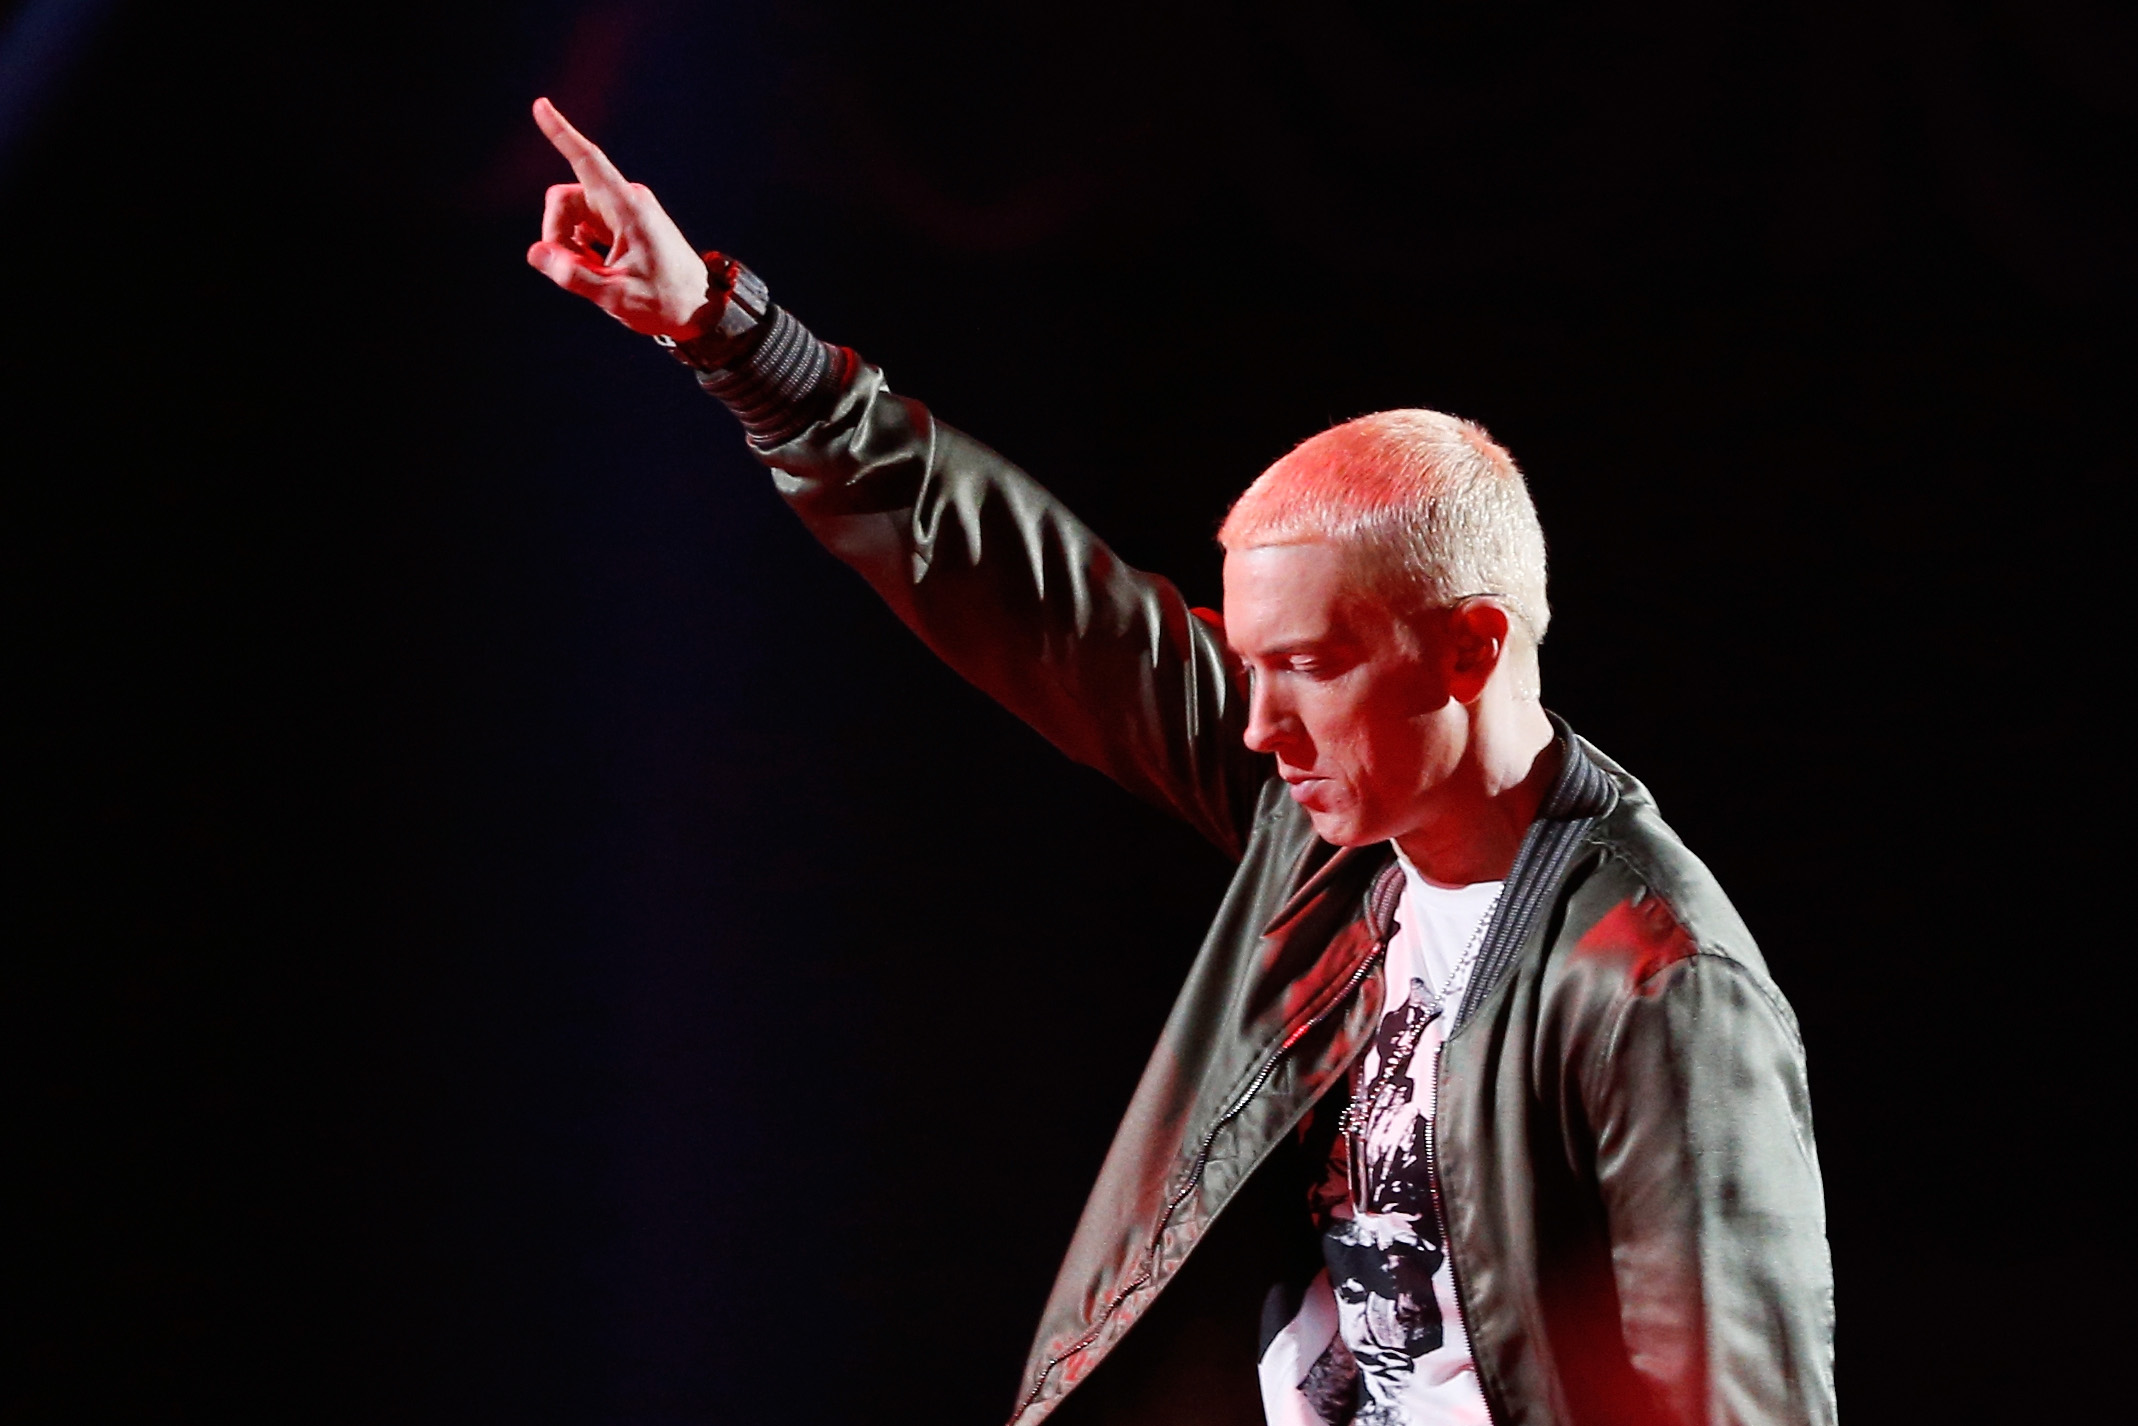 Eminem has announced the official merchandise collaboration between himself  and the Detroit Tigers.